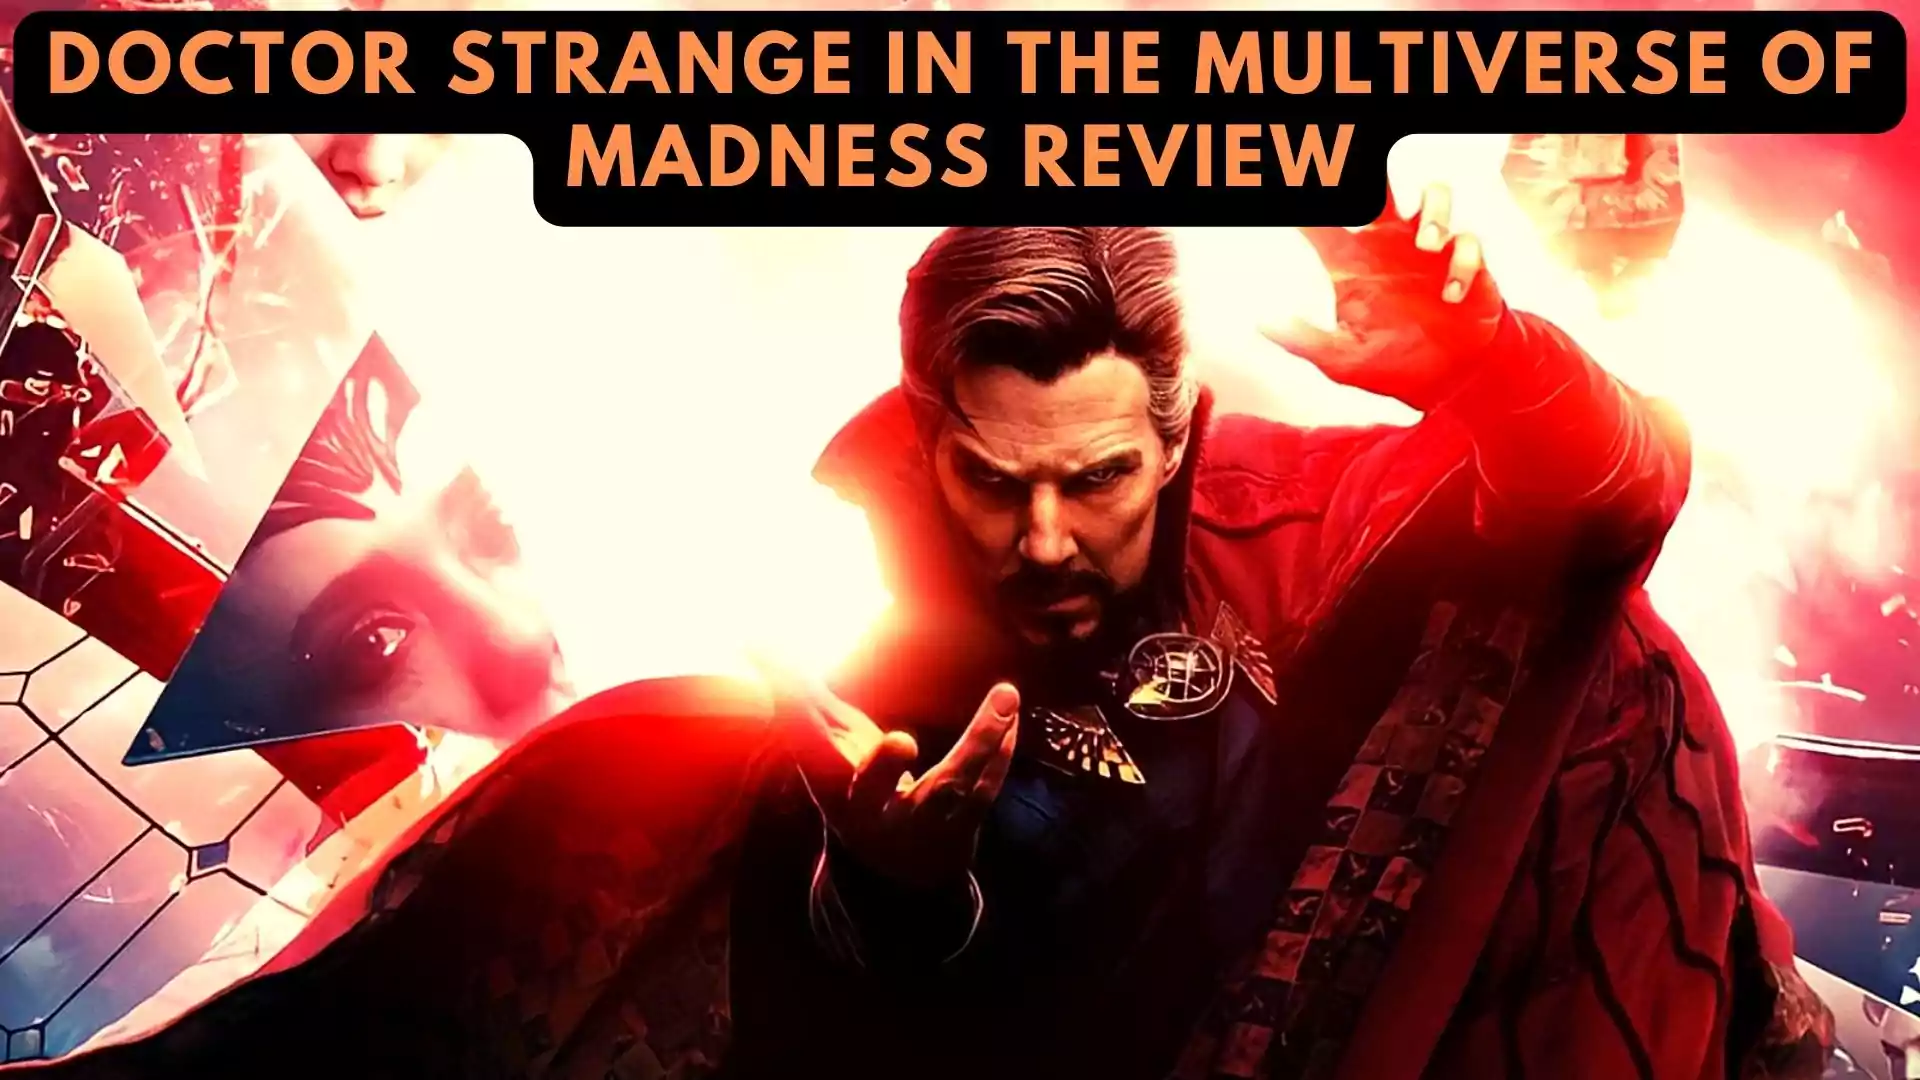 Doctor Strange in the Multiverse of Madness Review 2022